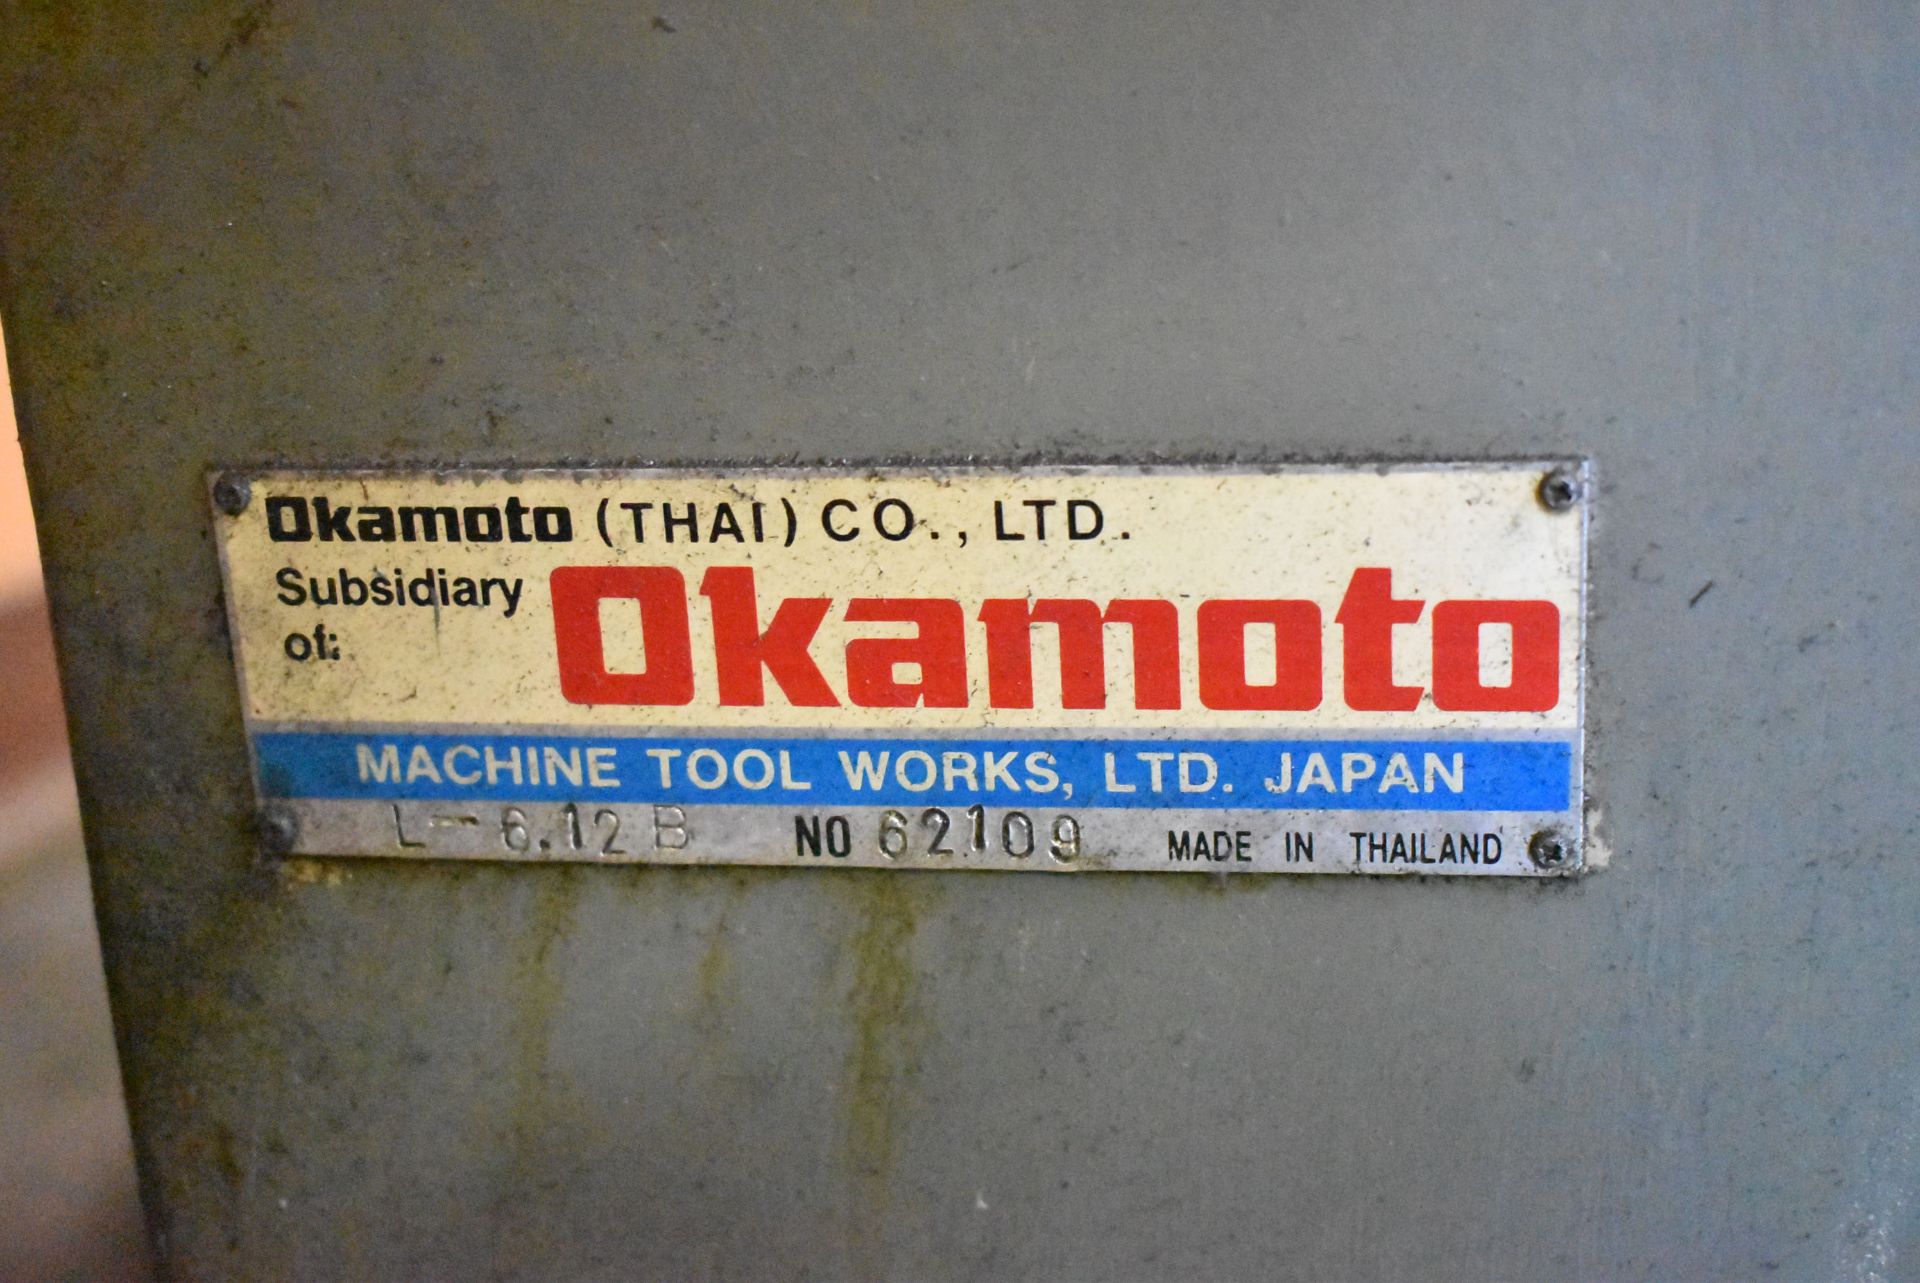 OKAMOTO L6-12B CONVENTIONAL SURFACE GRINDER WITH 6"X12" ELECTROMAGNETIC CHUCK, SPEEDS TO 3450 RPM, - Image 7 of 7